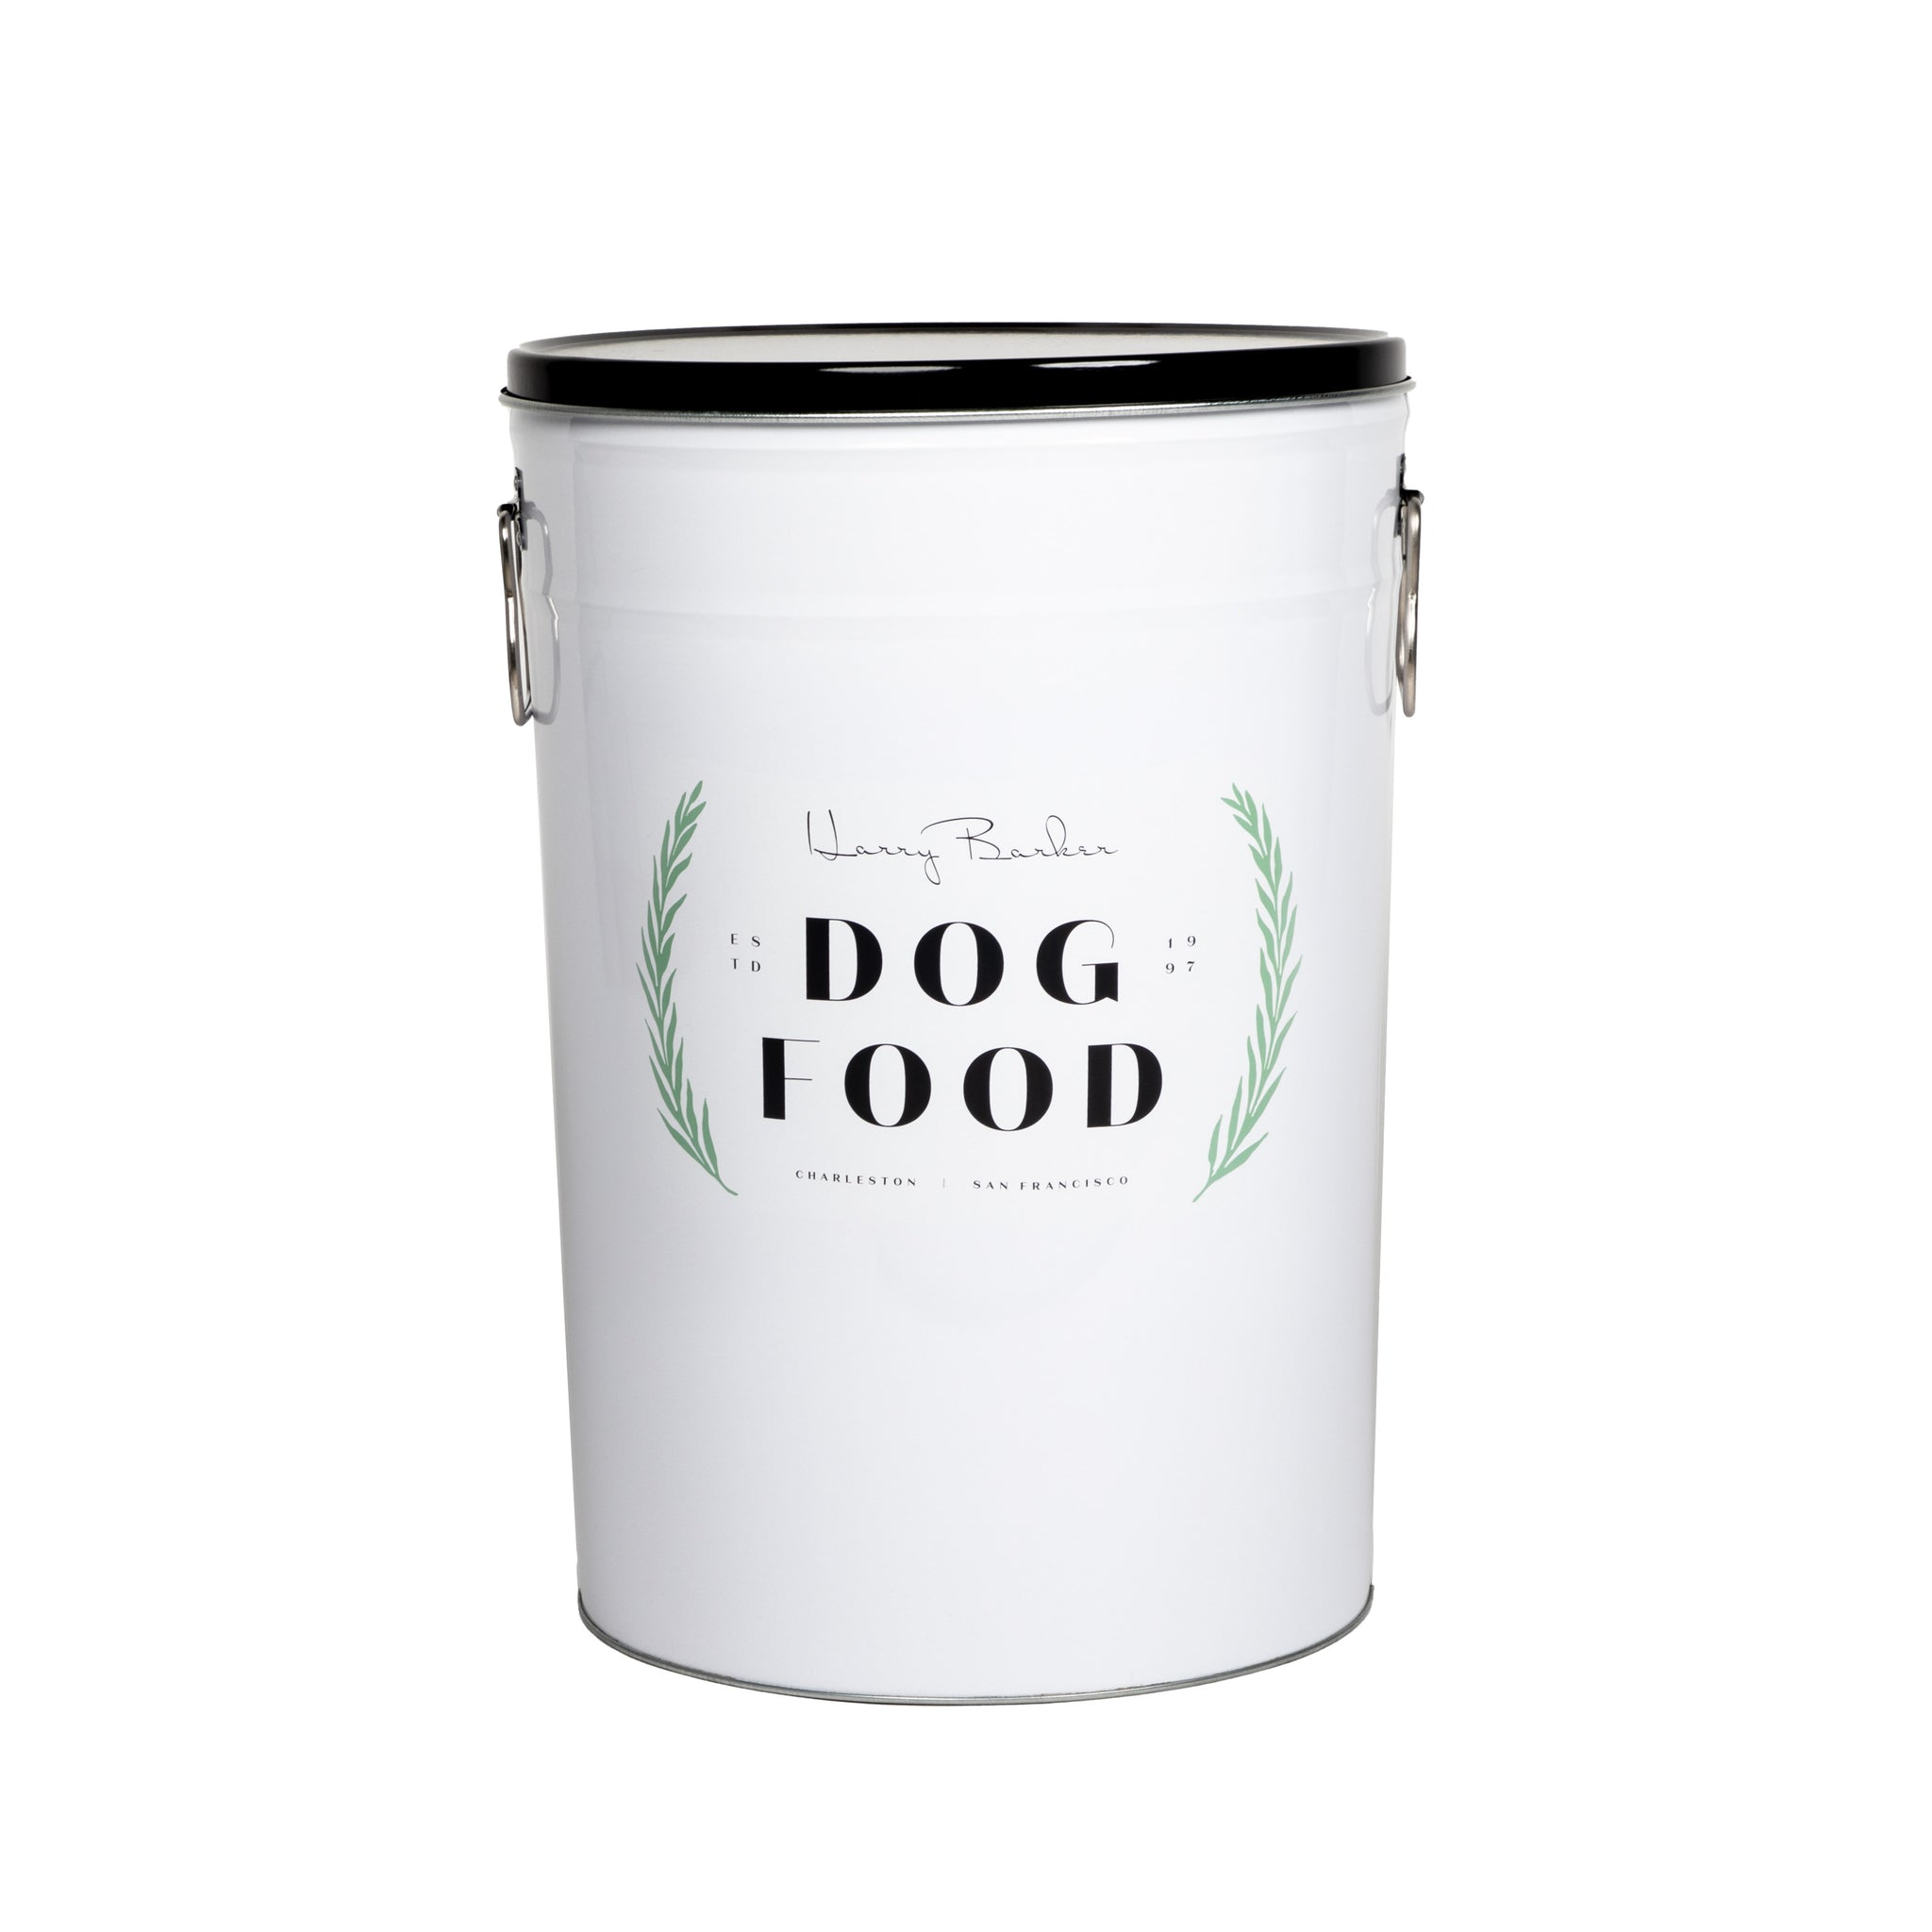 Harry Barker Classic Dog Food Storage Canister, White, Small